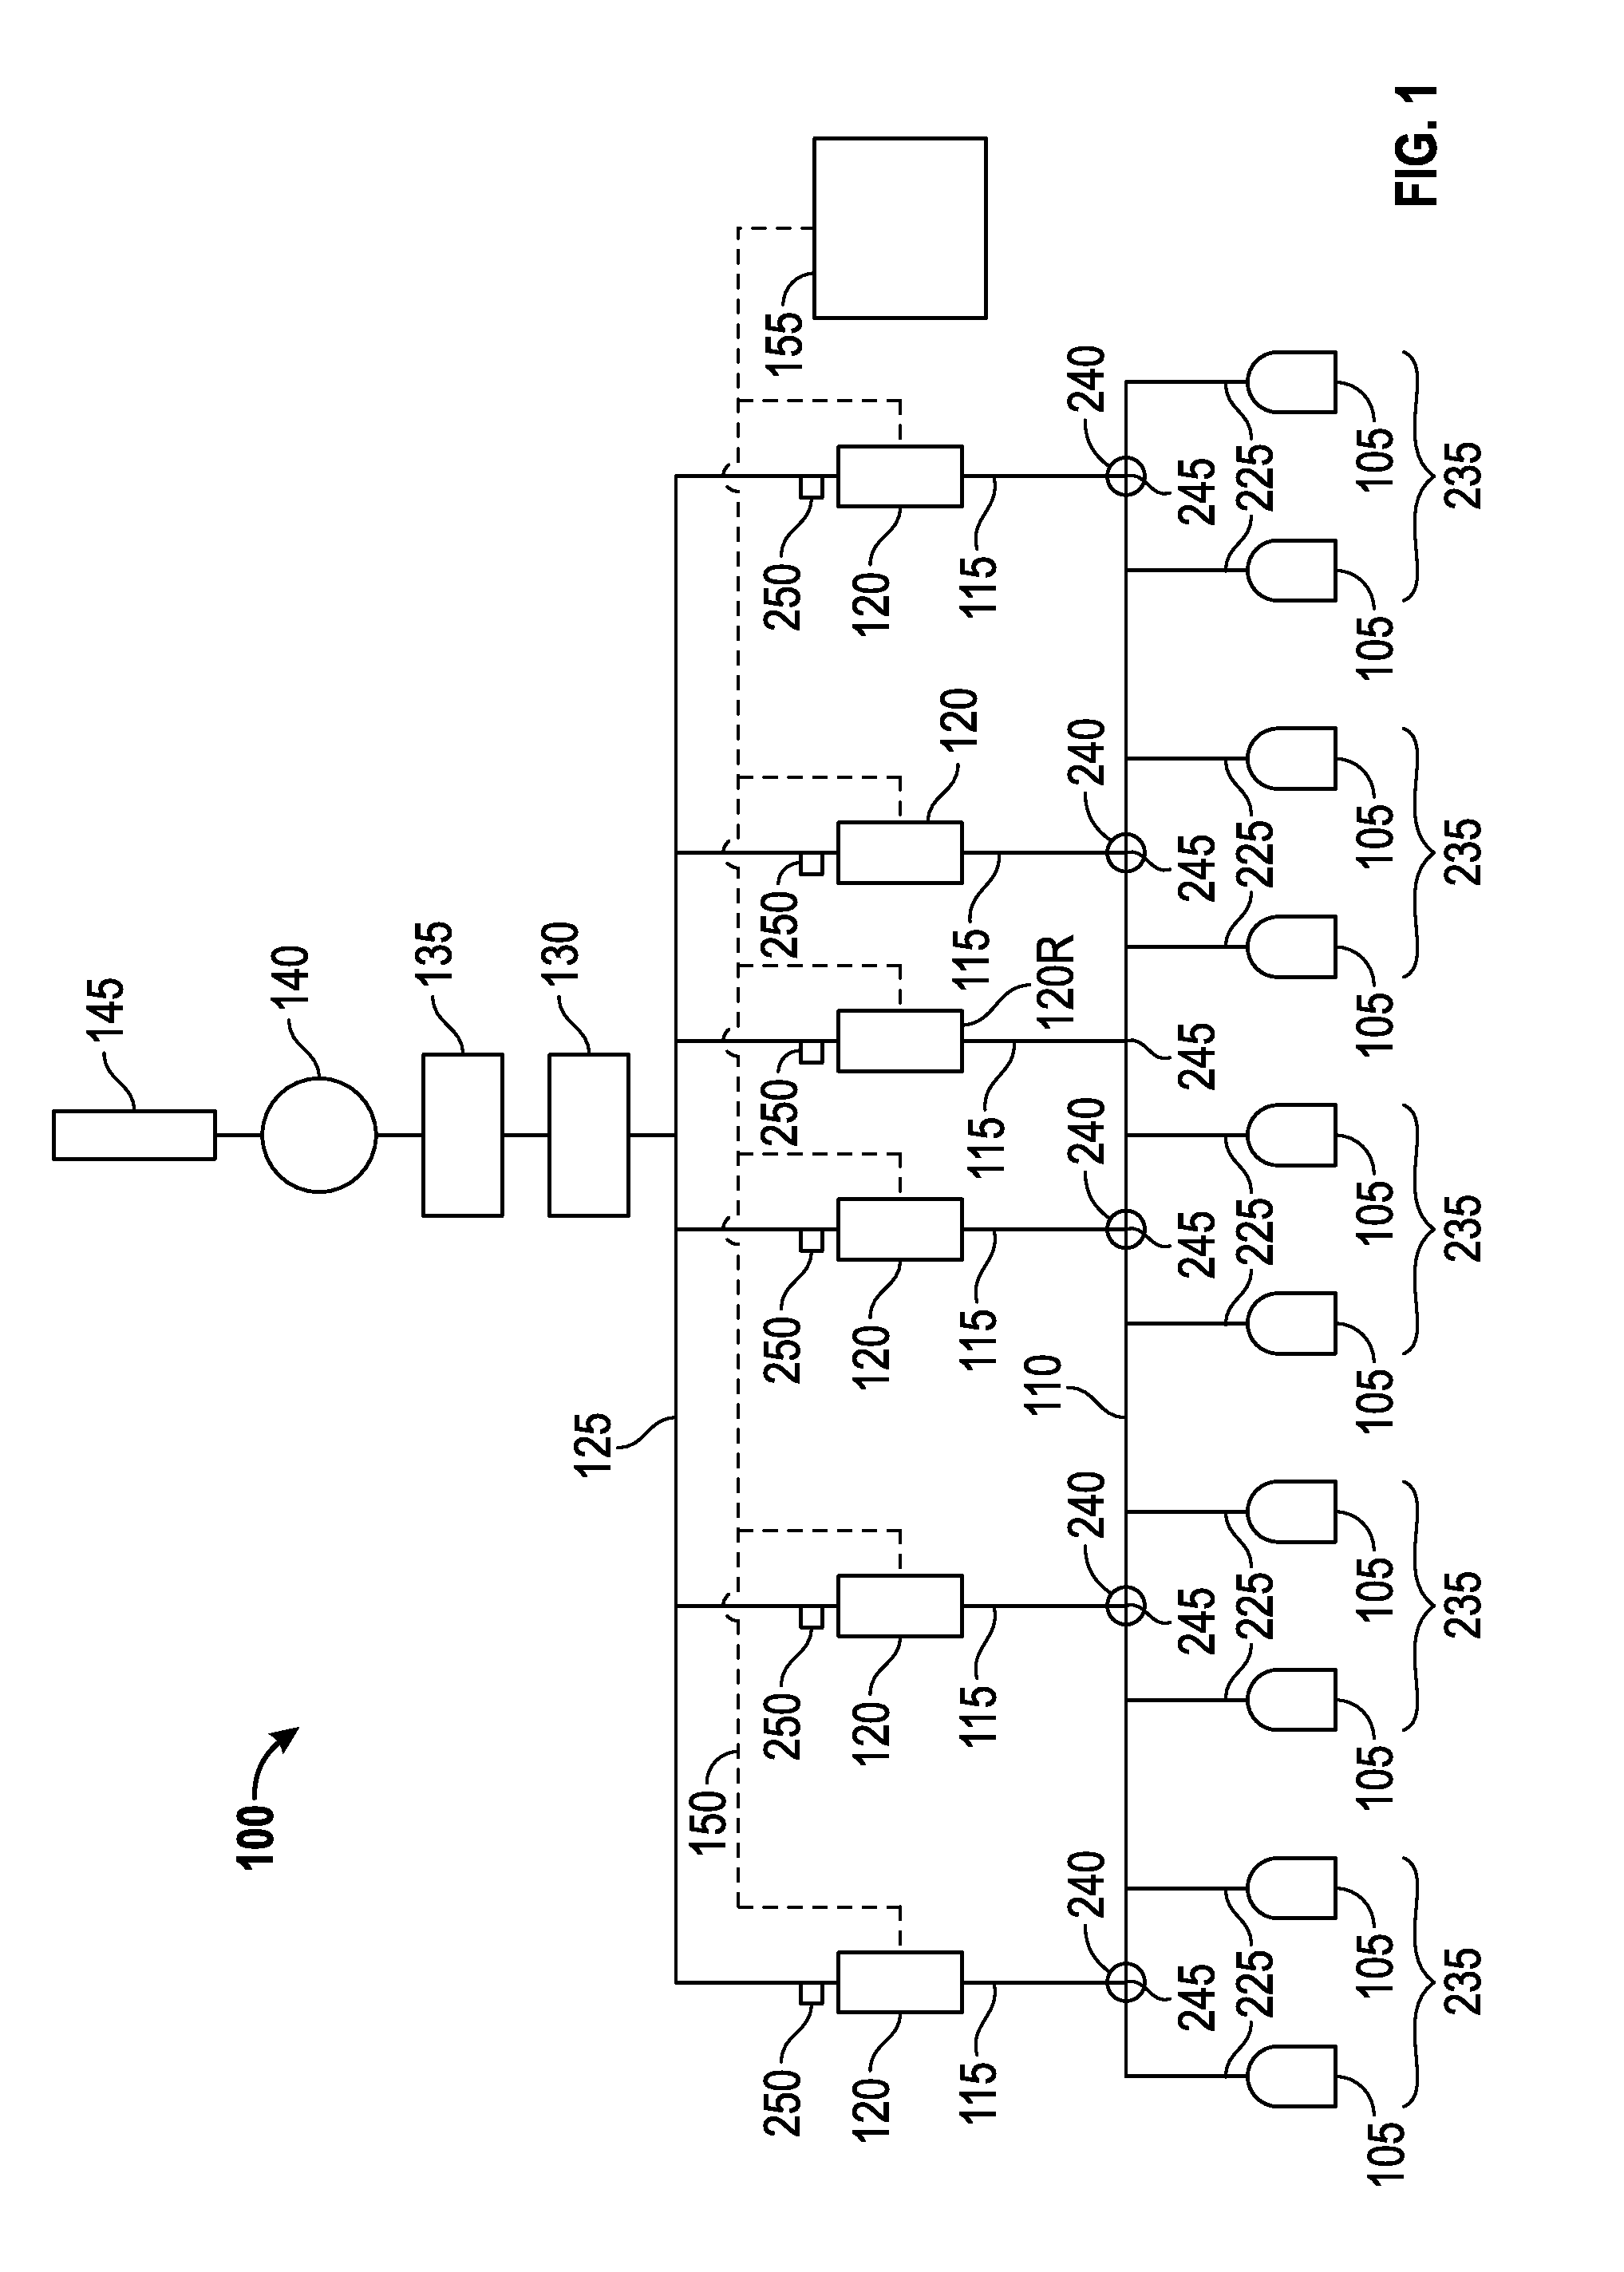 Automatic draft control system for coke plants